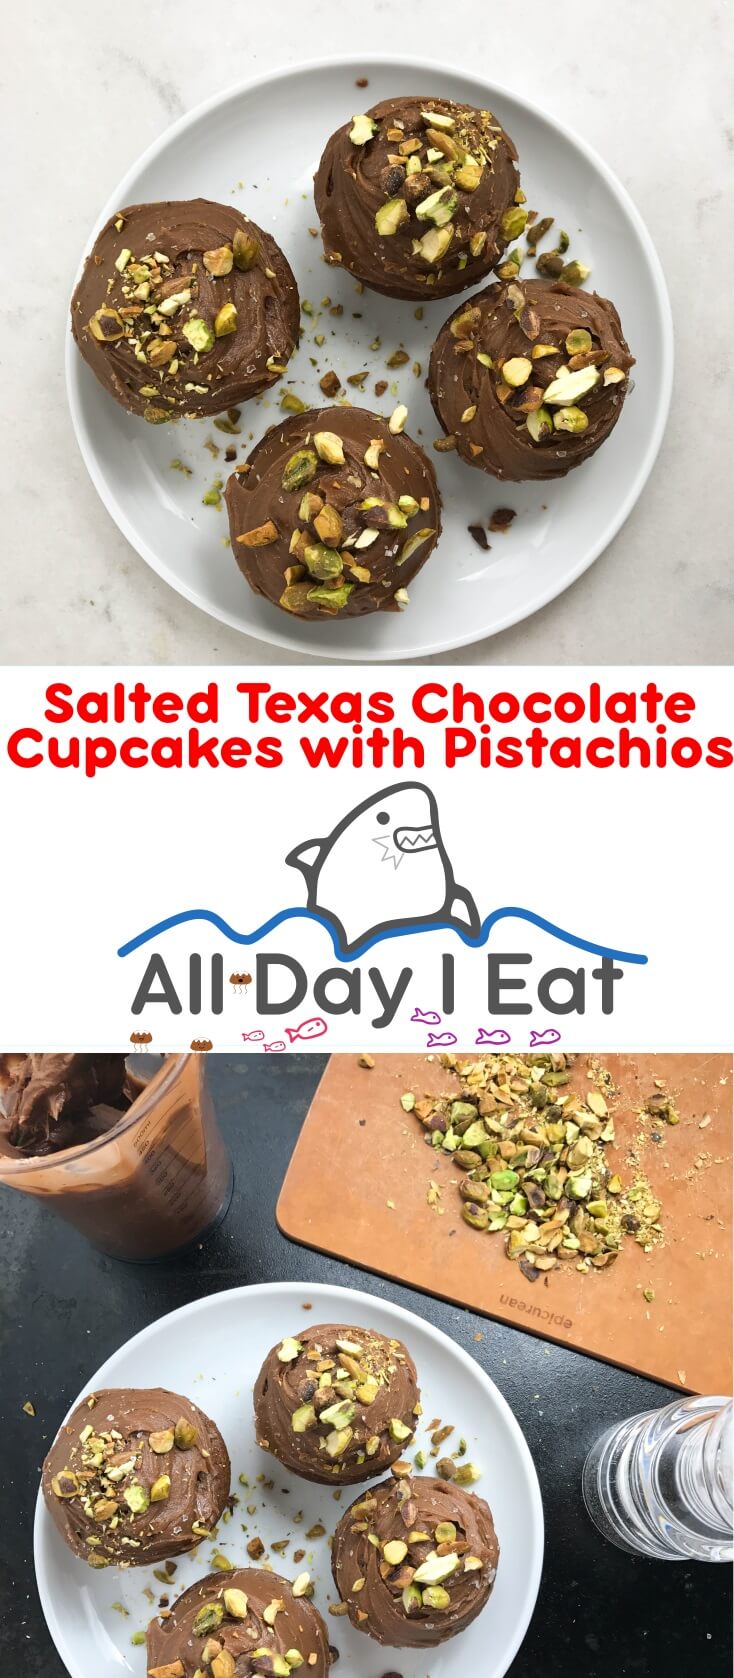 Salted Texas Chocolate Cupcakes. Super tasty and not overly sweet, pistachios and salt take your chocolate dreams to the next level! | www.alldayieat.com